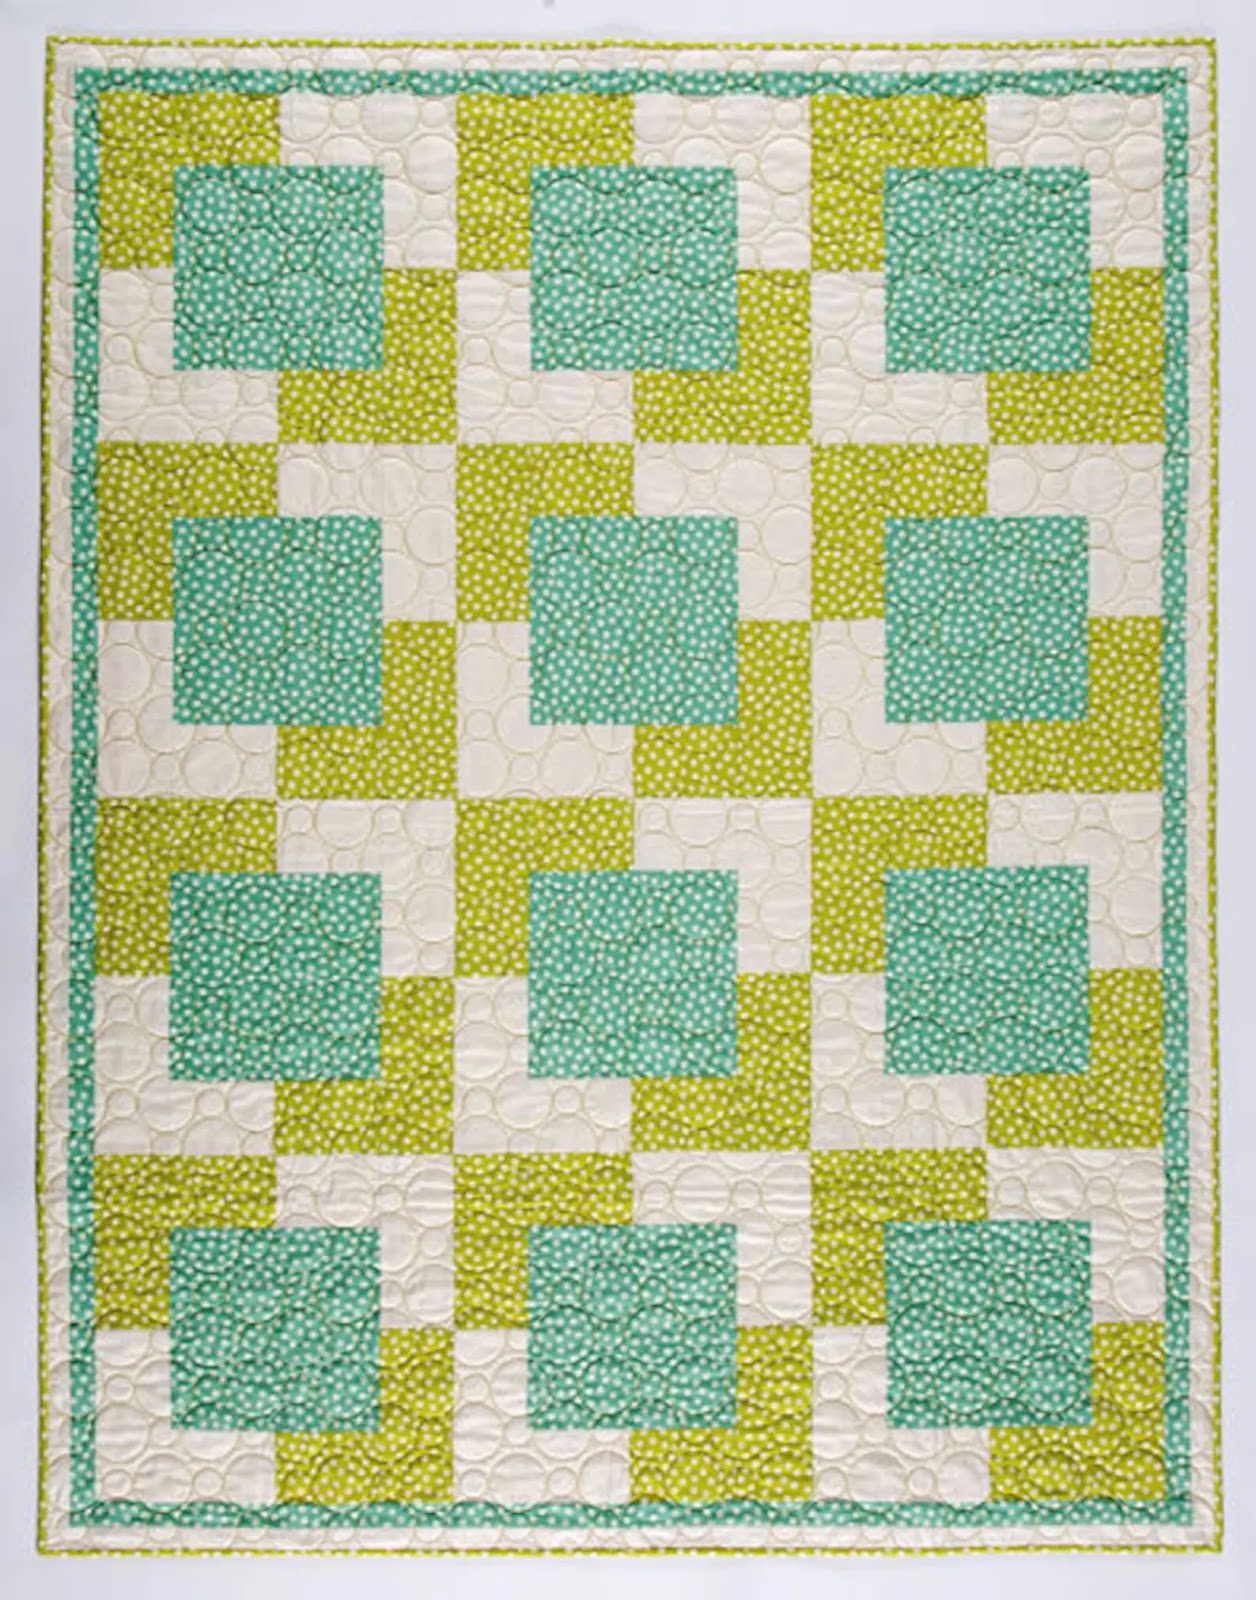 Town square 3-Yard Quilt Patterns 